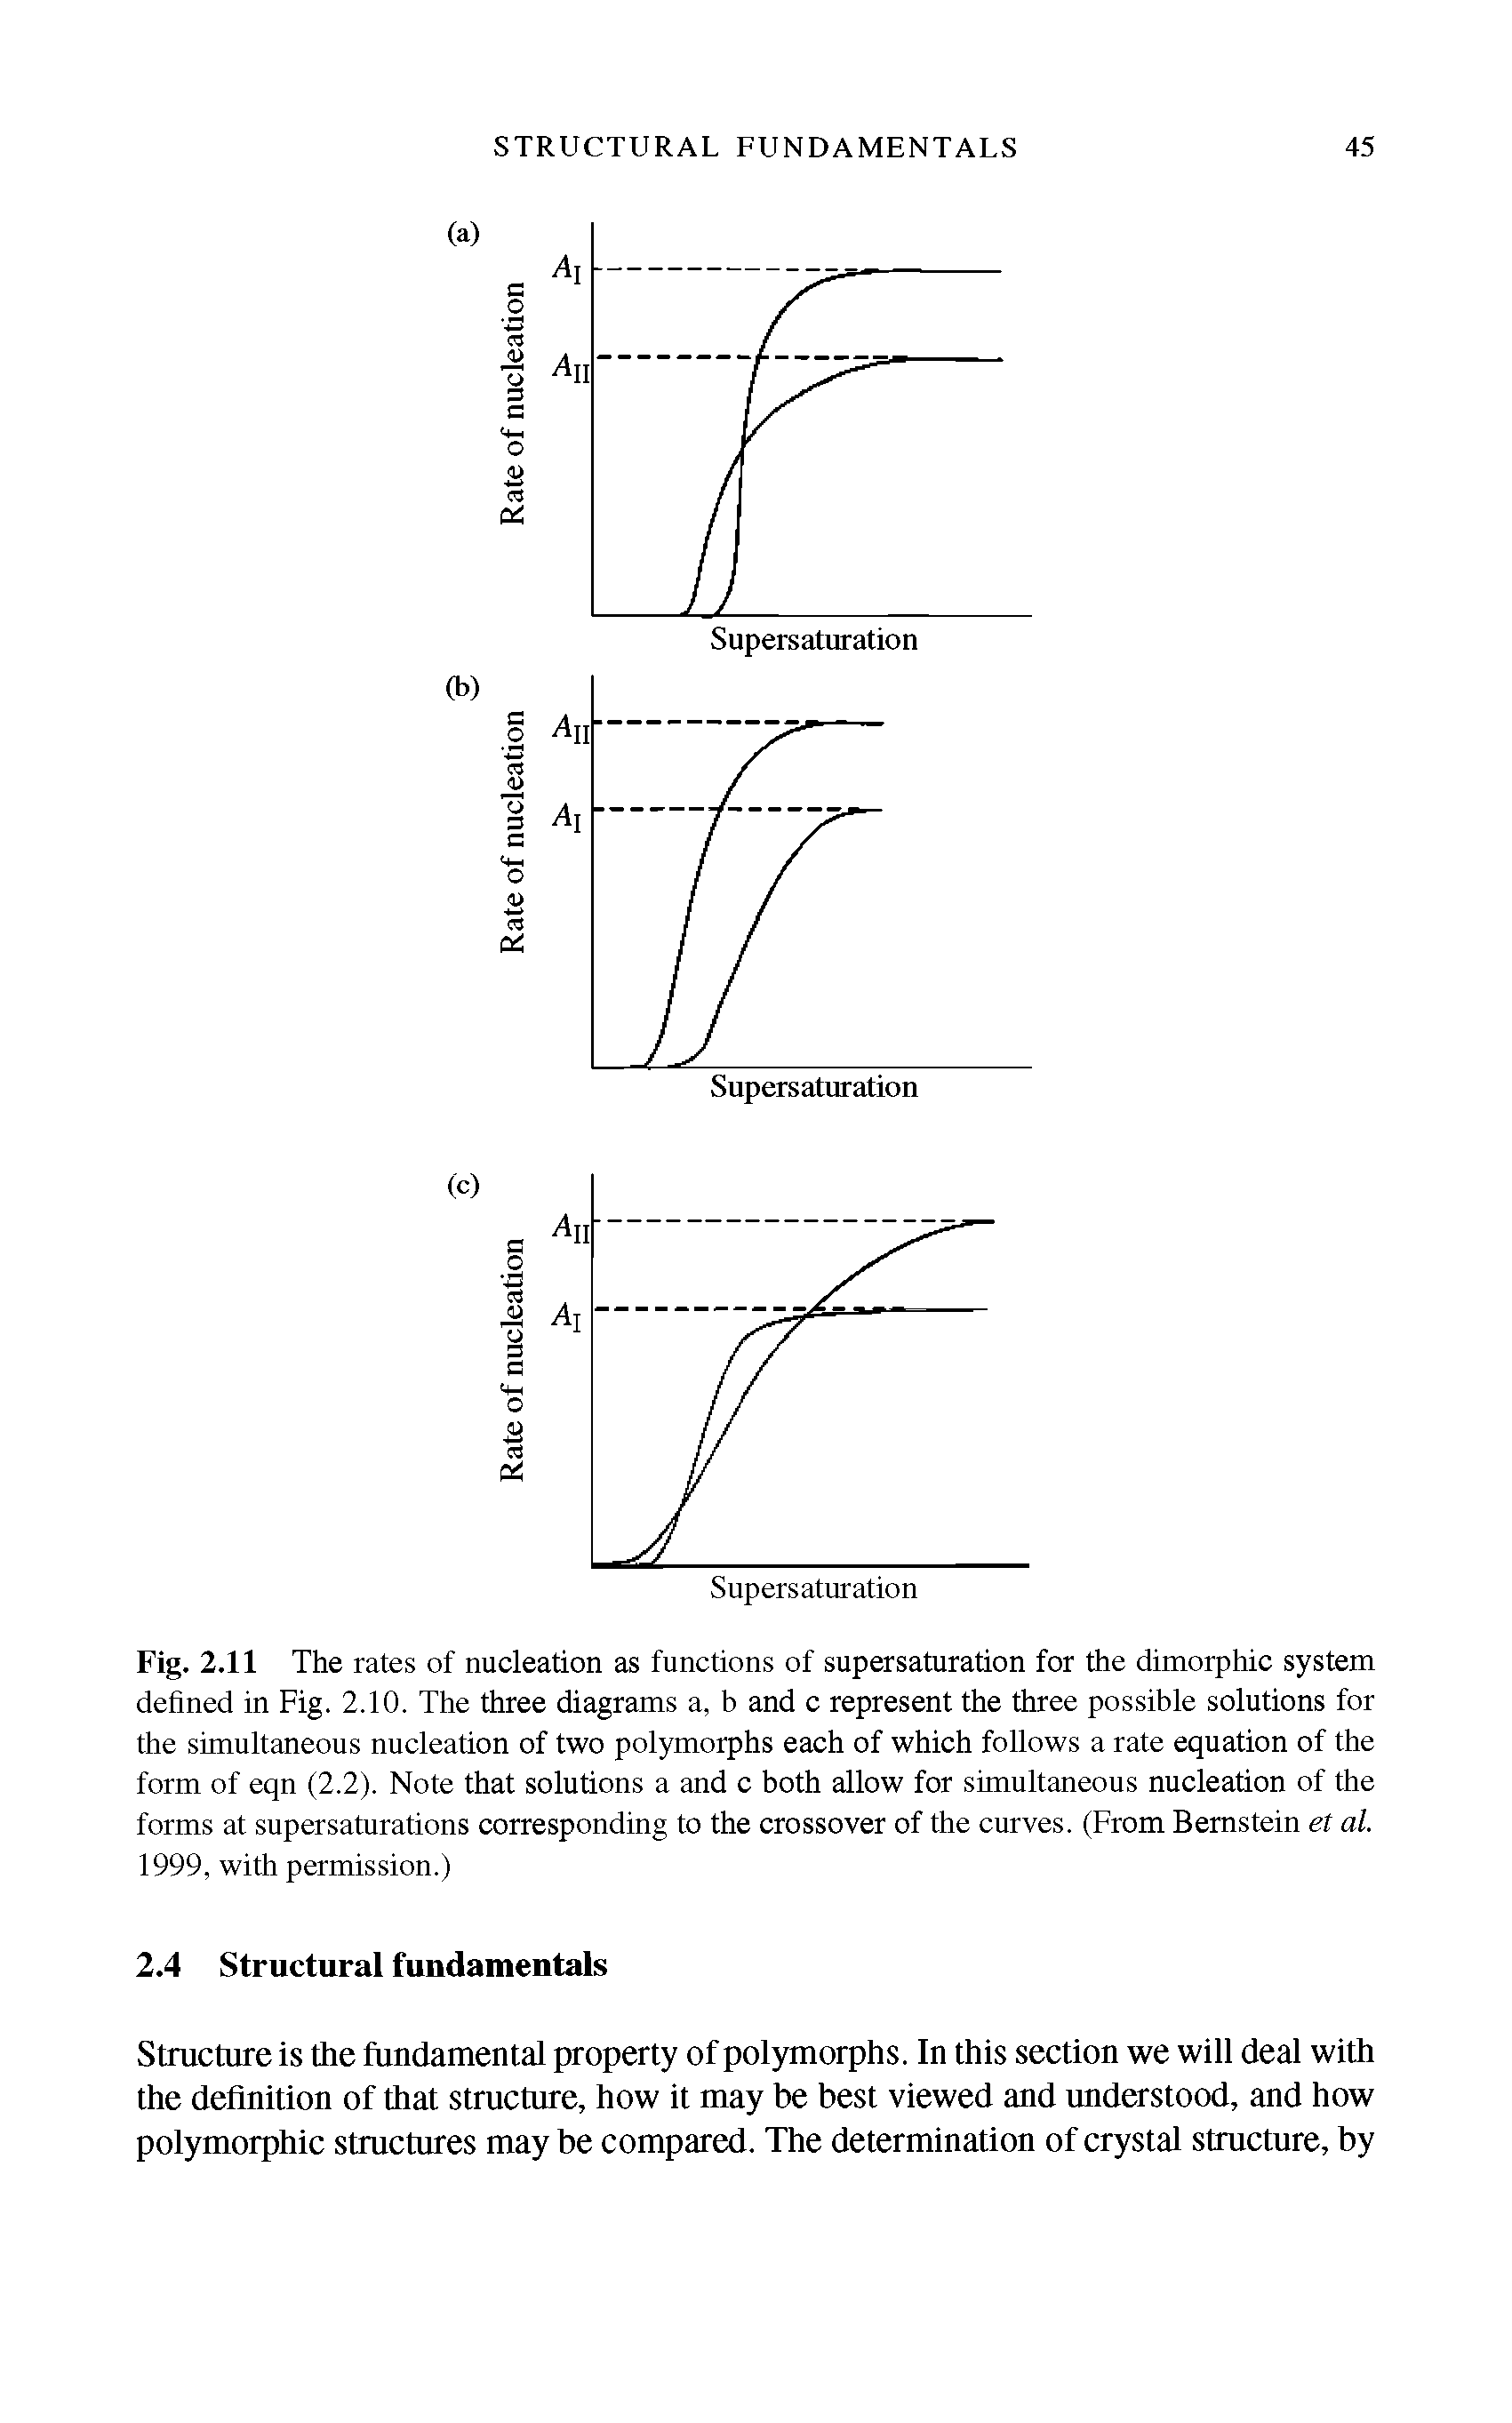 Fig. 2.11 The rates of nucleation as functions of supersaturation for the dimorphic system defined in Fig. 2.10. The three diagrams a, b and c represent the three possible solutions for the simultaneous nucleation of two polymorphs each of which follows a rate equation of the form of eqn (2.2). Note that solutions a and c both allow for simultaneous nucleation of the forms at supersaturations corresponding to the crossover of the curves. (From Bernstein et al. 1999, with permission.)...